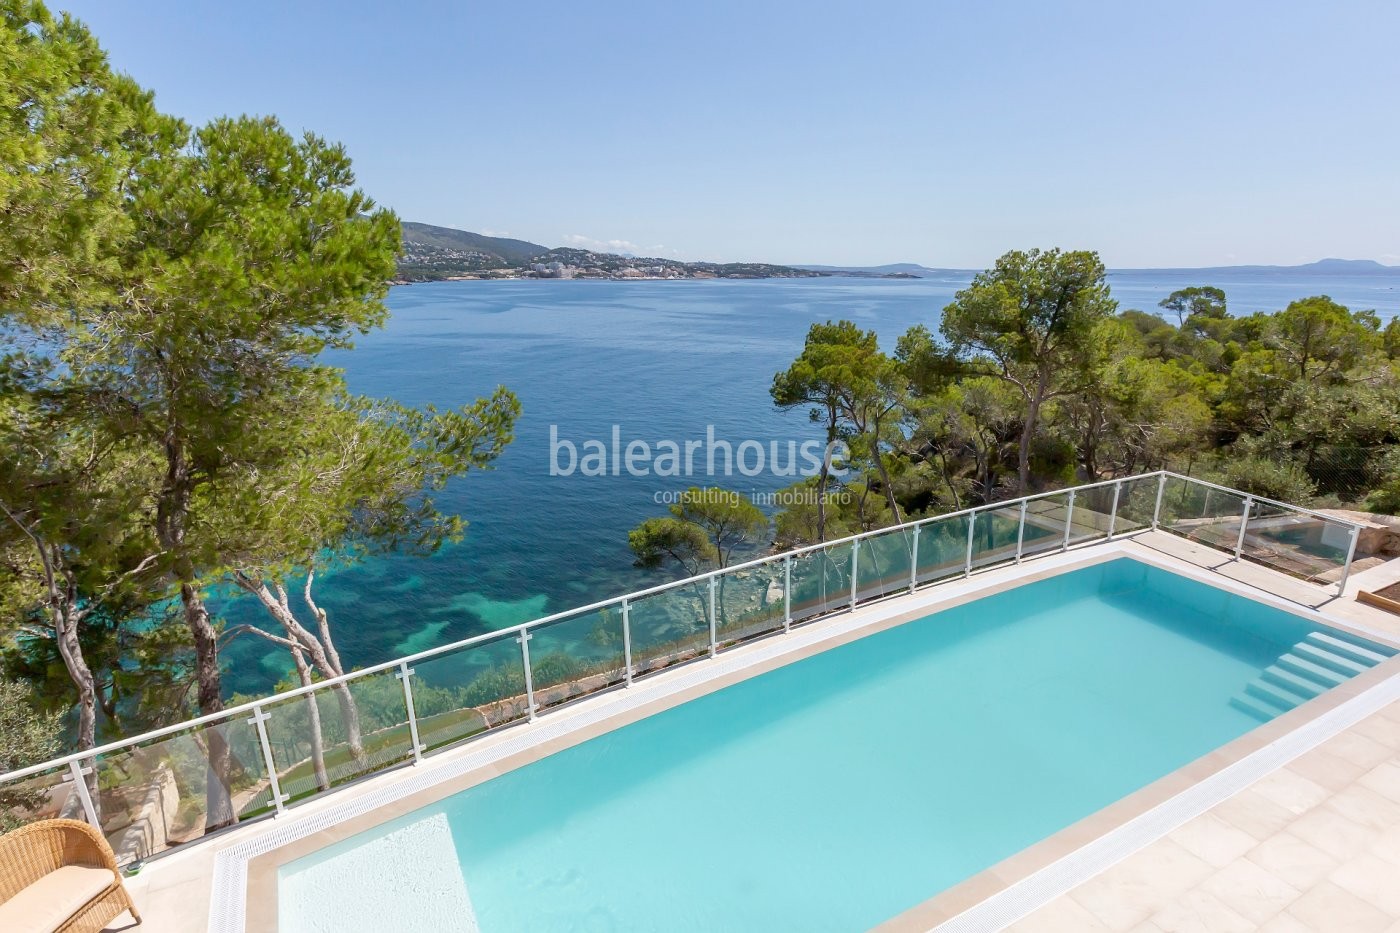 Seafront villa with direct sea access very close to Palma